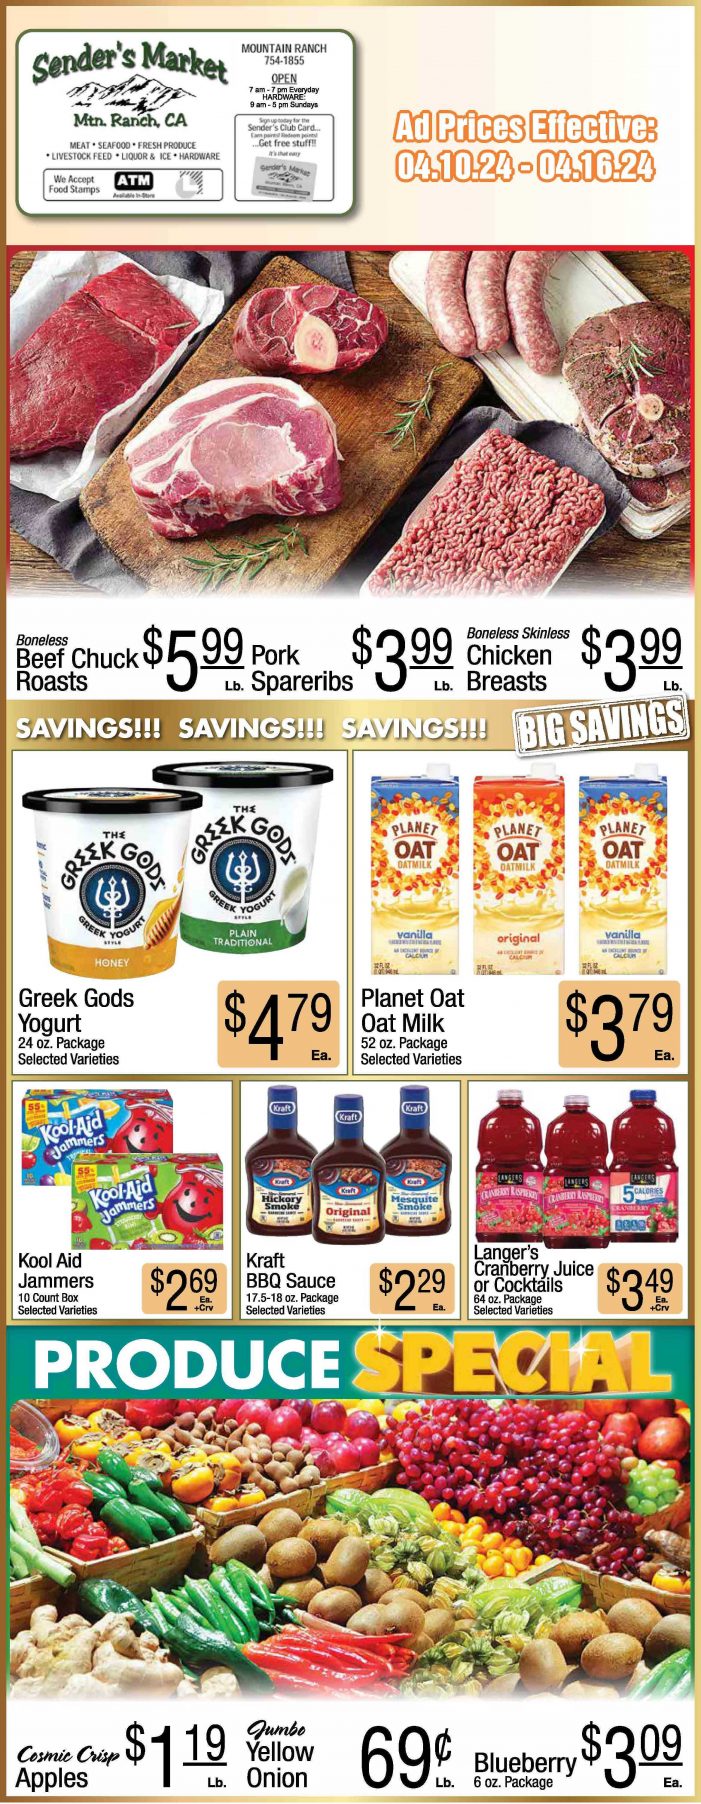 Sender’s Market Weekly Ad & Grocery Specials Through April 16th! Shop Local & Save!!